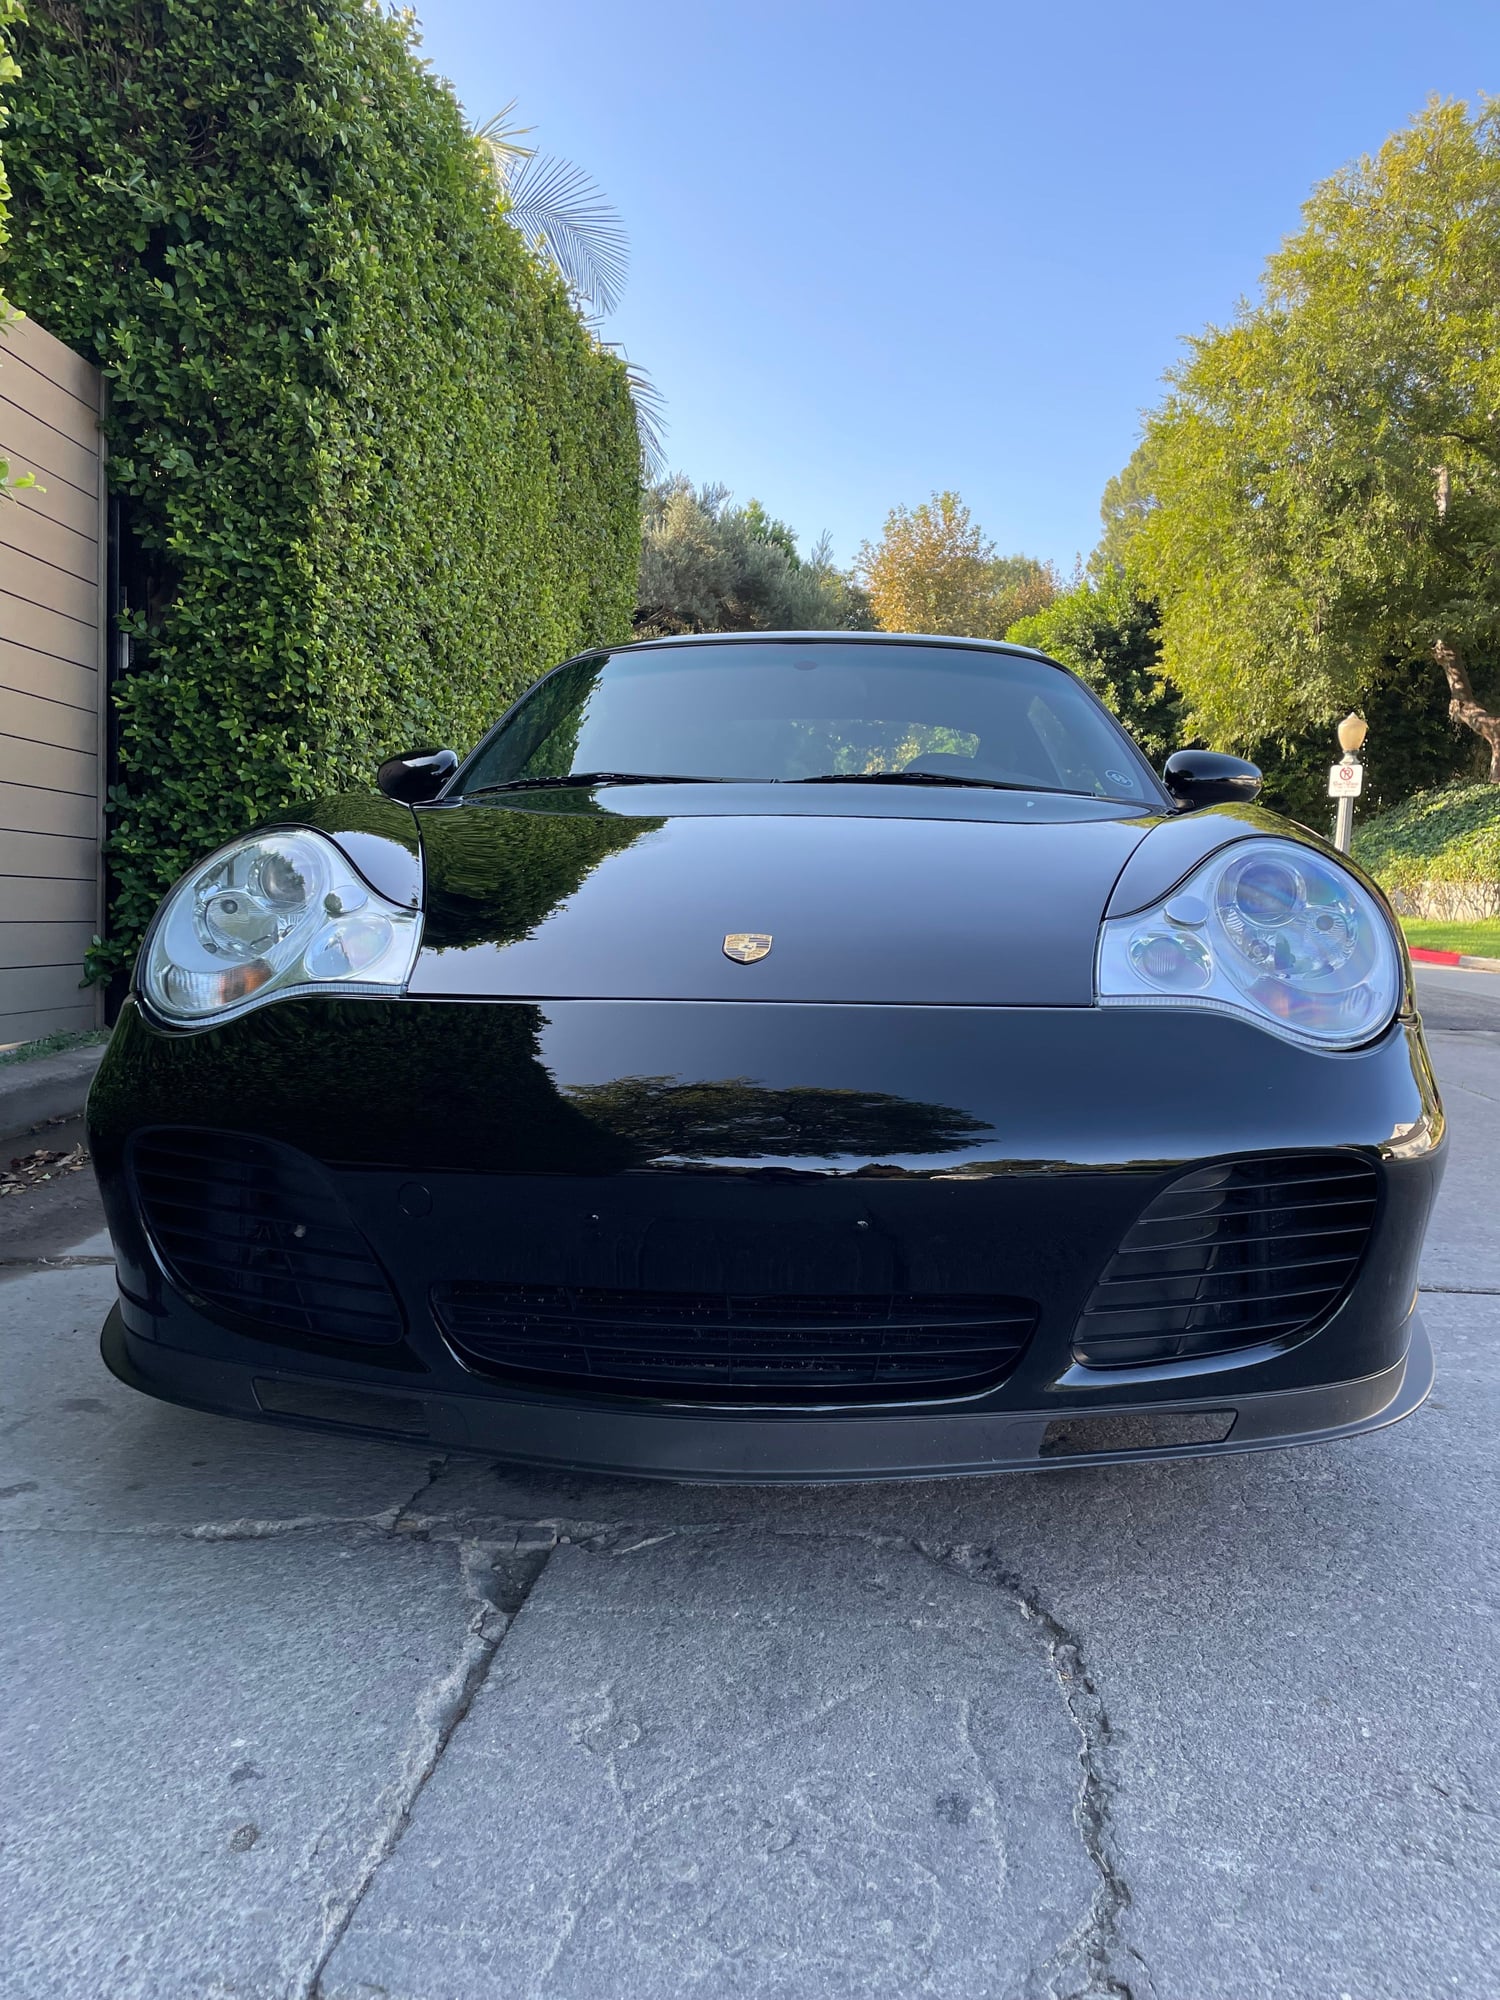 2005 Porsche 911 - Ultra Rare 2005 Turbo"S" For Sale - Used - VIN WP0AB29965S685192 - 9,840 Miles - 6 cyl - AWD - Manual - Coupe - Black - Sherman Oaks, CA 91423, United States